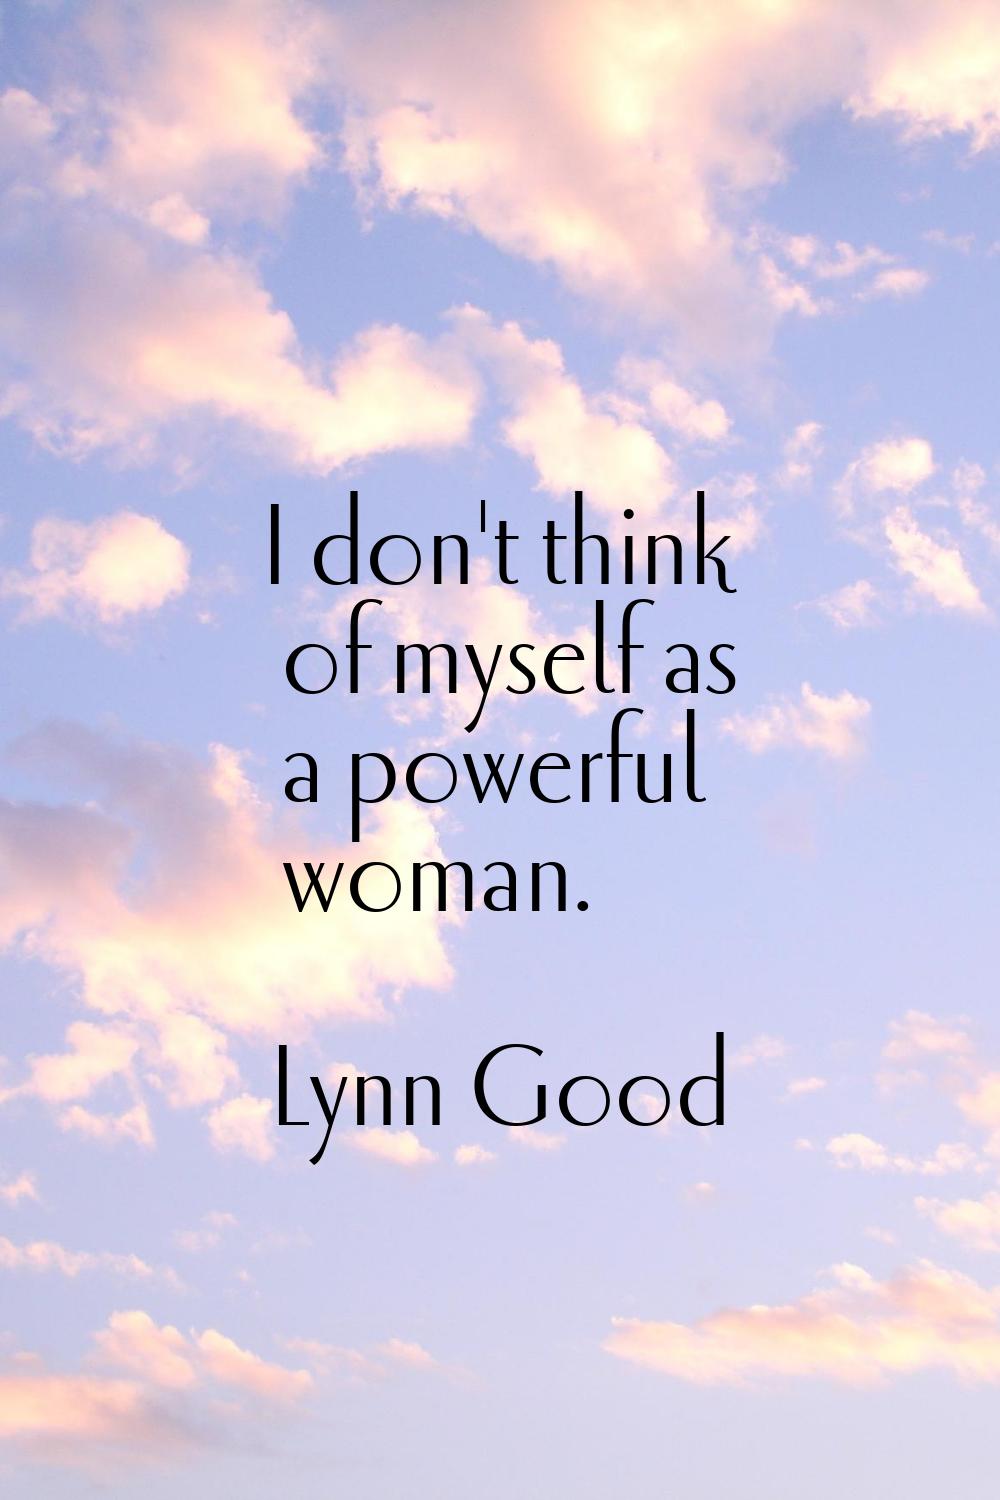 I don't think of myself as a powerful woman.